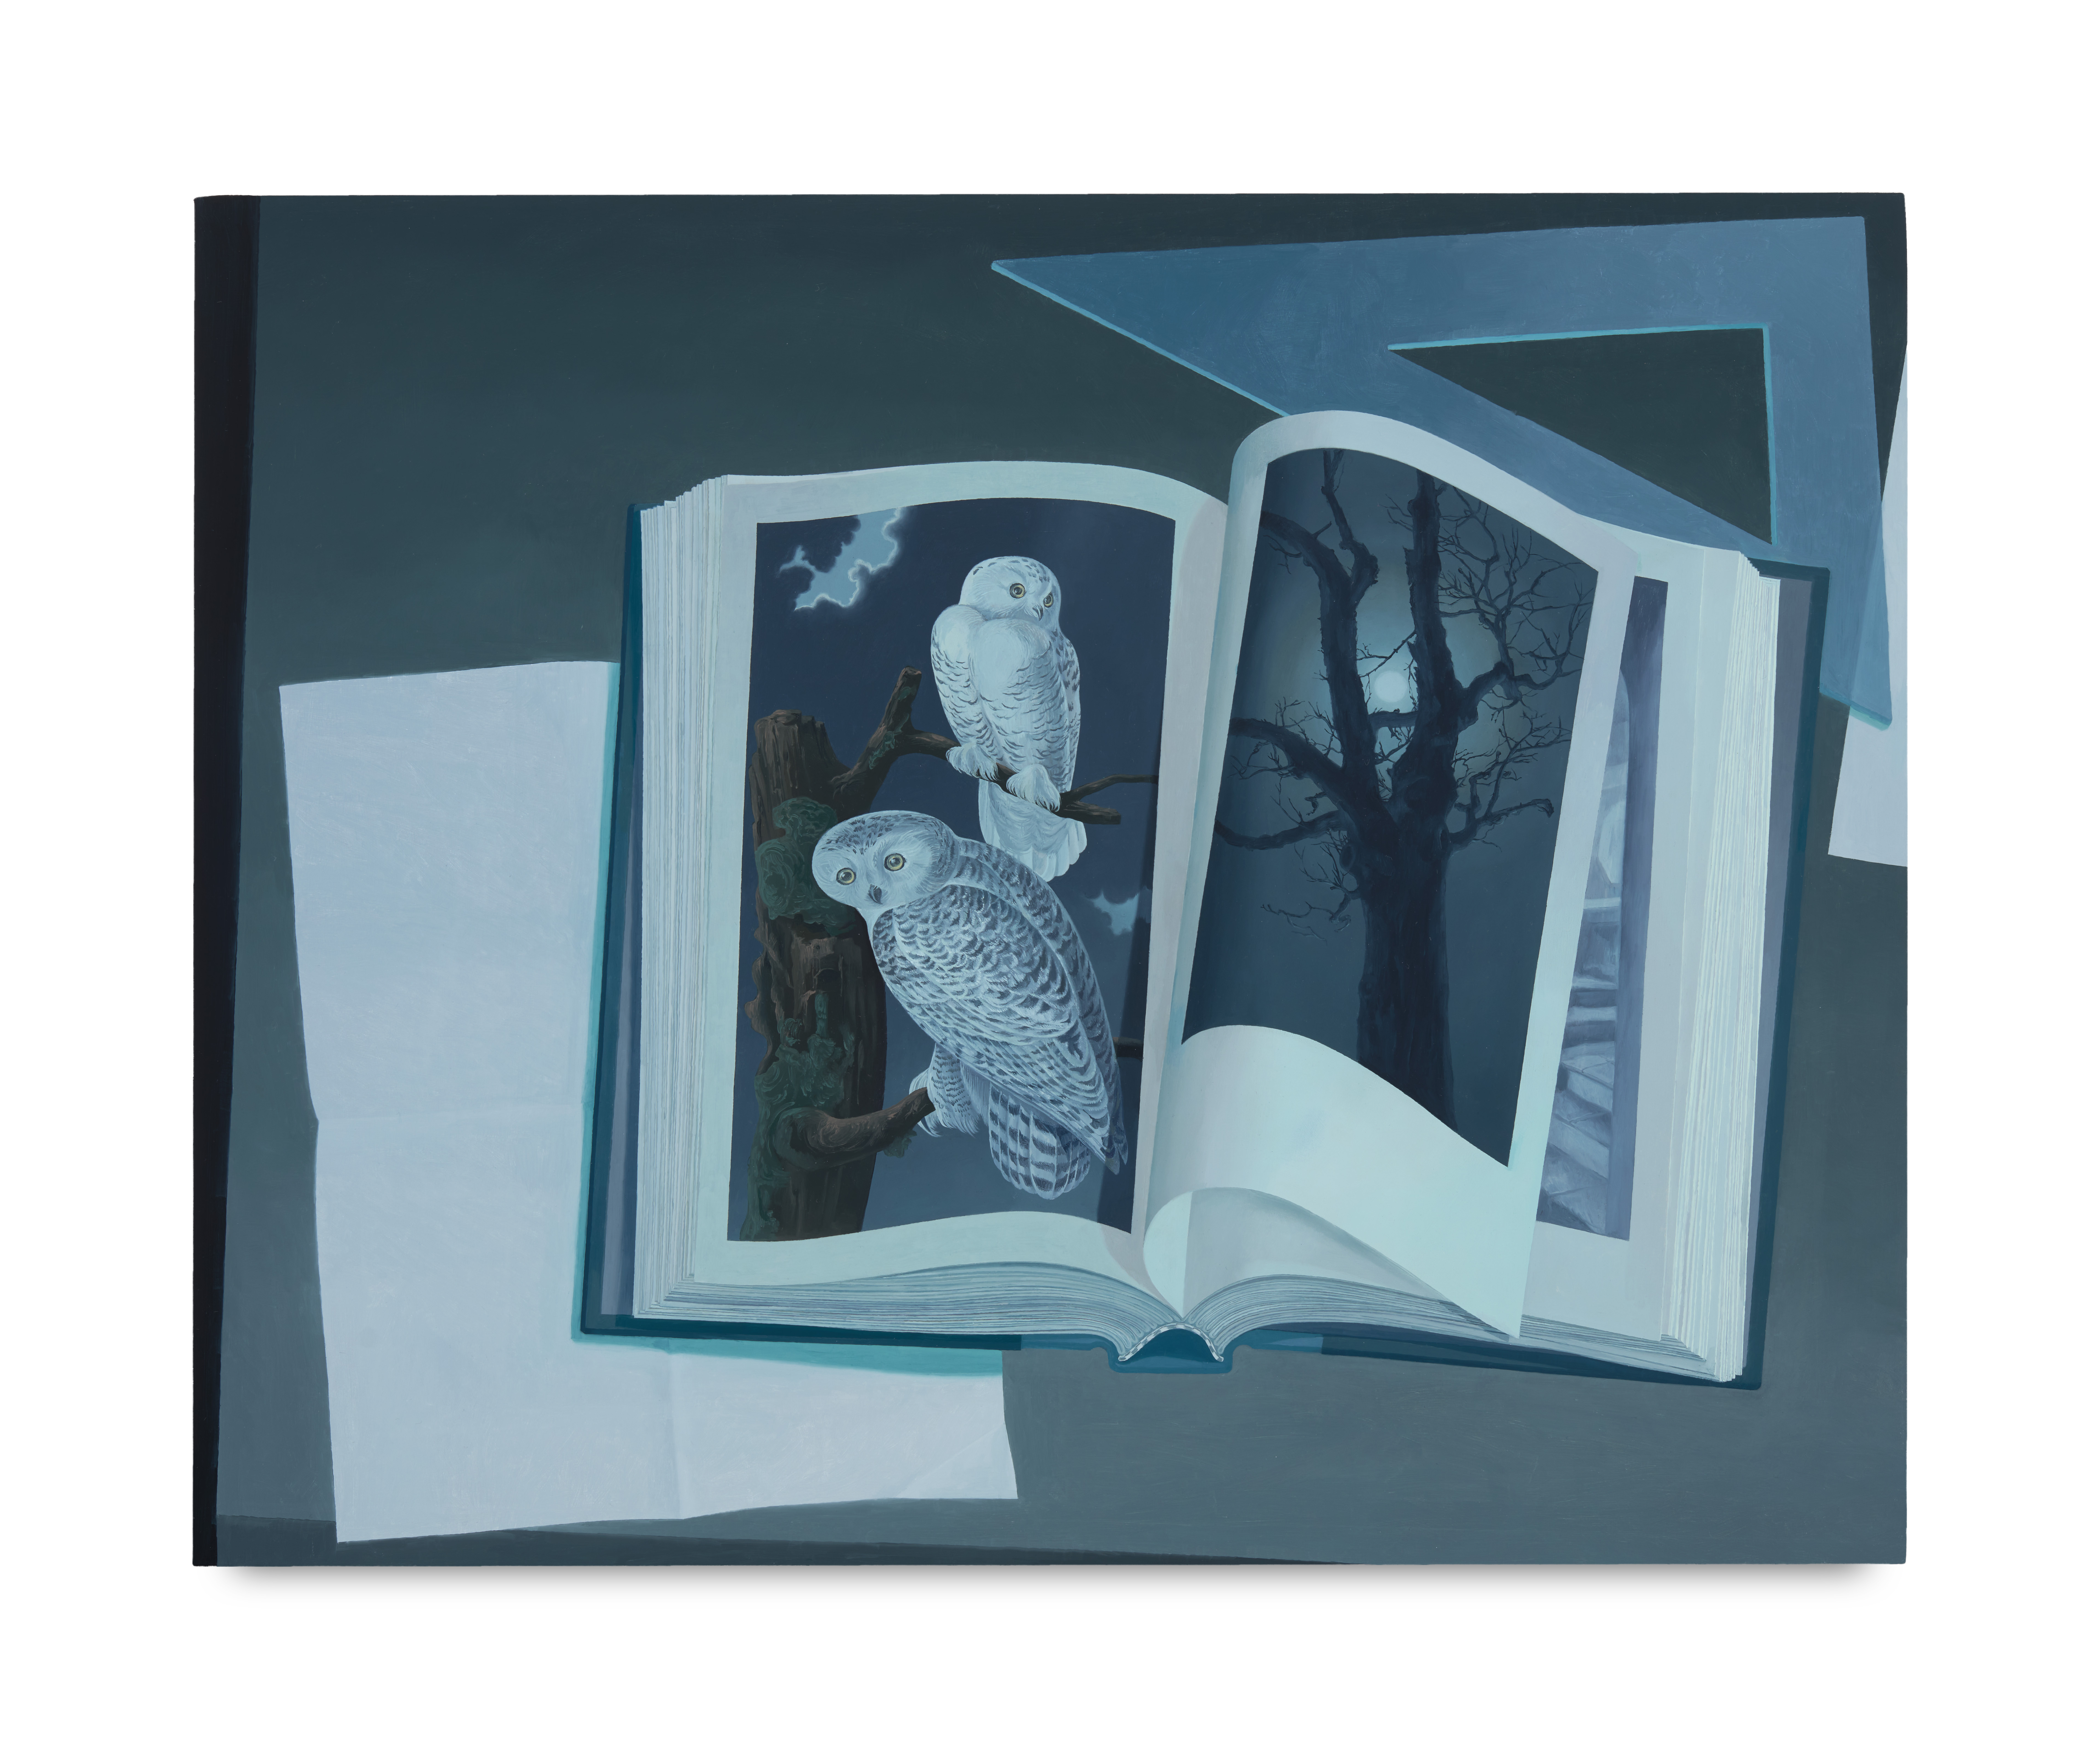 painting by olivia jia depicting an open book on a workplace with a triangle measure and a few loose sheets. the book is open to an image of two white owls on the left page and a silhouette of a tree against a moonlit sky on the right. the image is rendered in dusky dark blue and gray tones